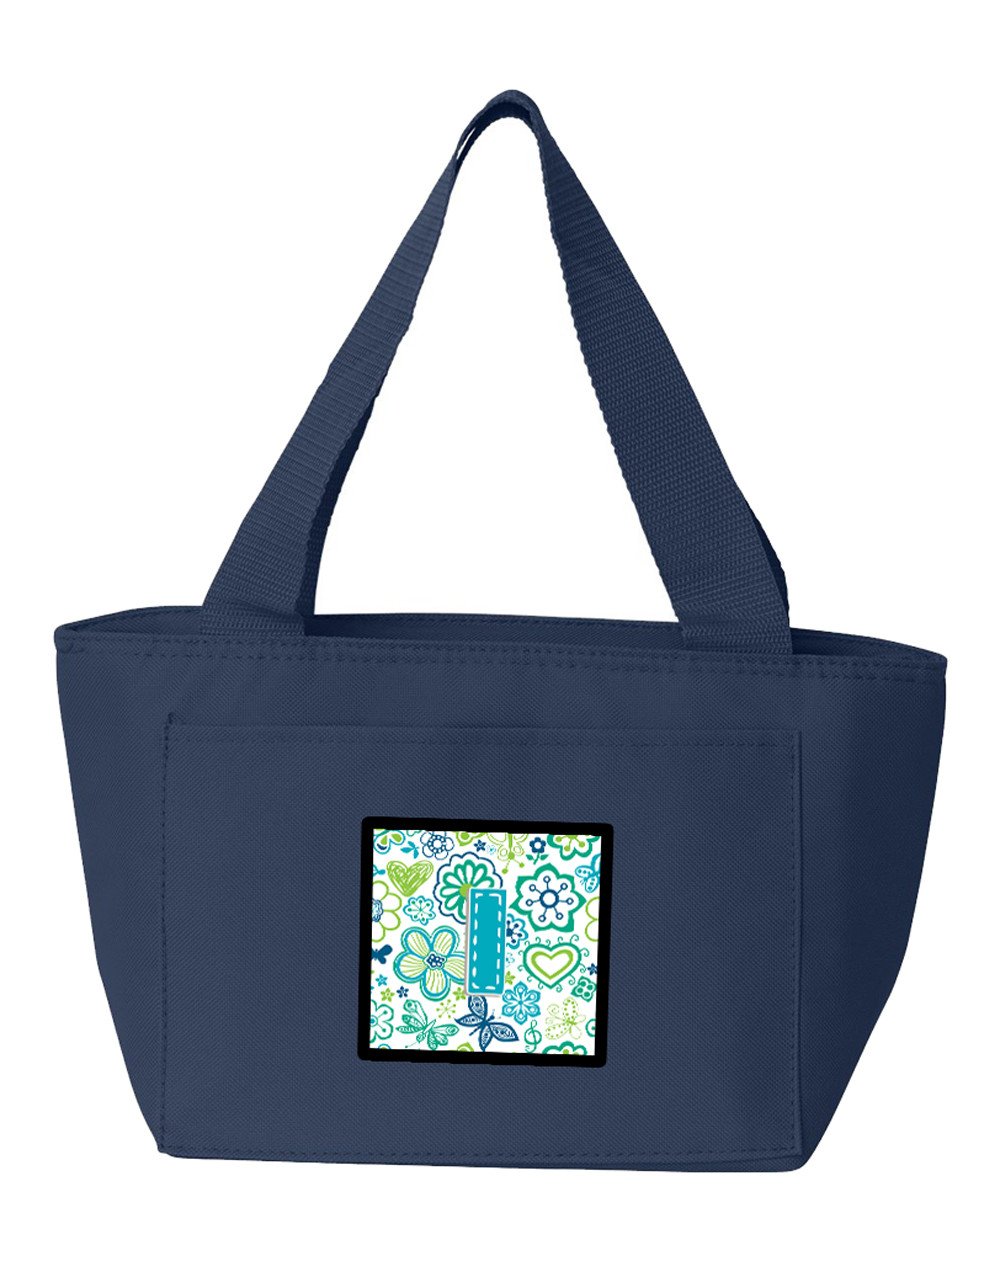 Letter I Flowers and Butterflies Teal Blue Lunch Bag CJ2006-INA-8808 by Caroline's Treasures